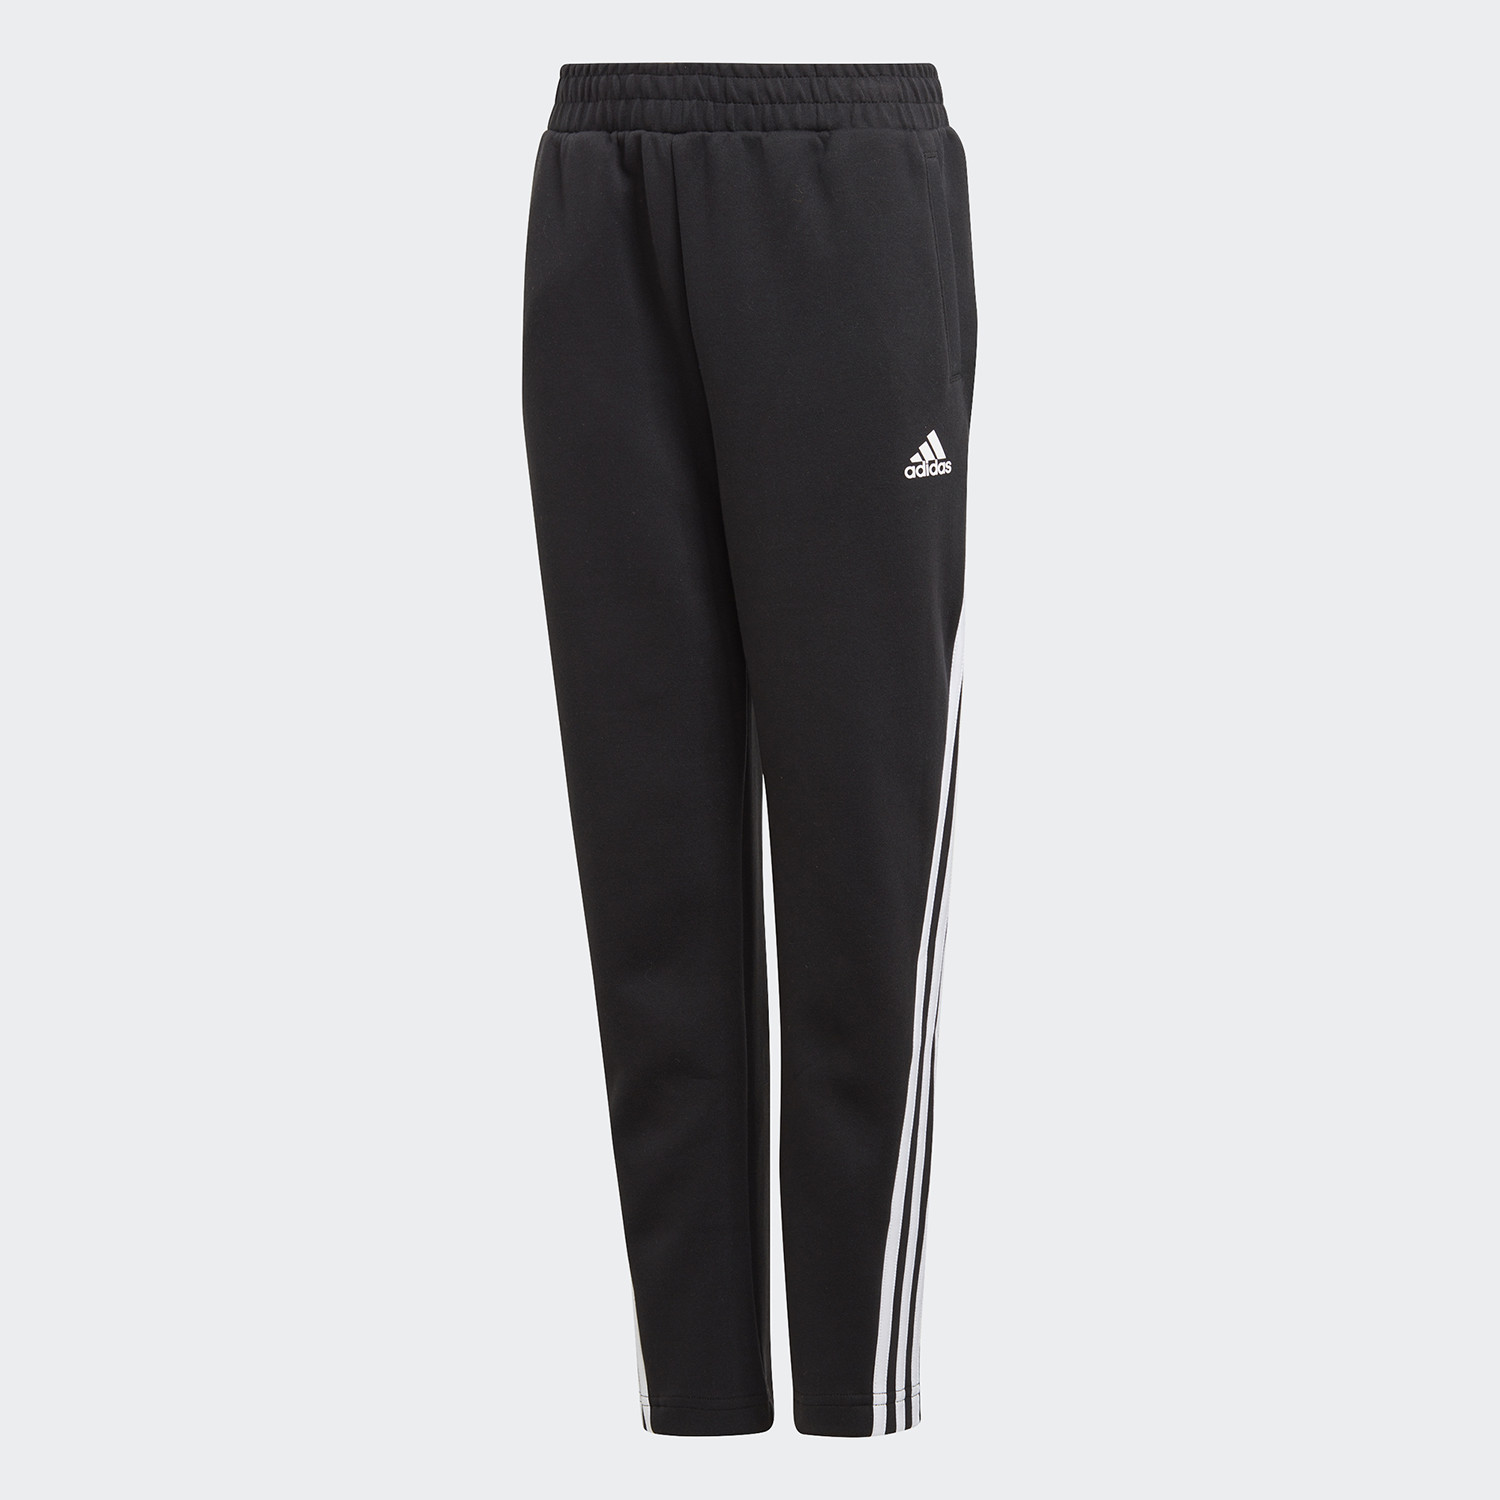 adidas Performance 3 – Stripes Doubleknit Tapered Leg Παιδικό Παντελόνι (9000060332_1480)